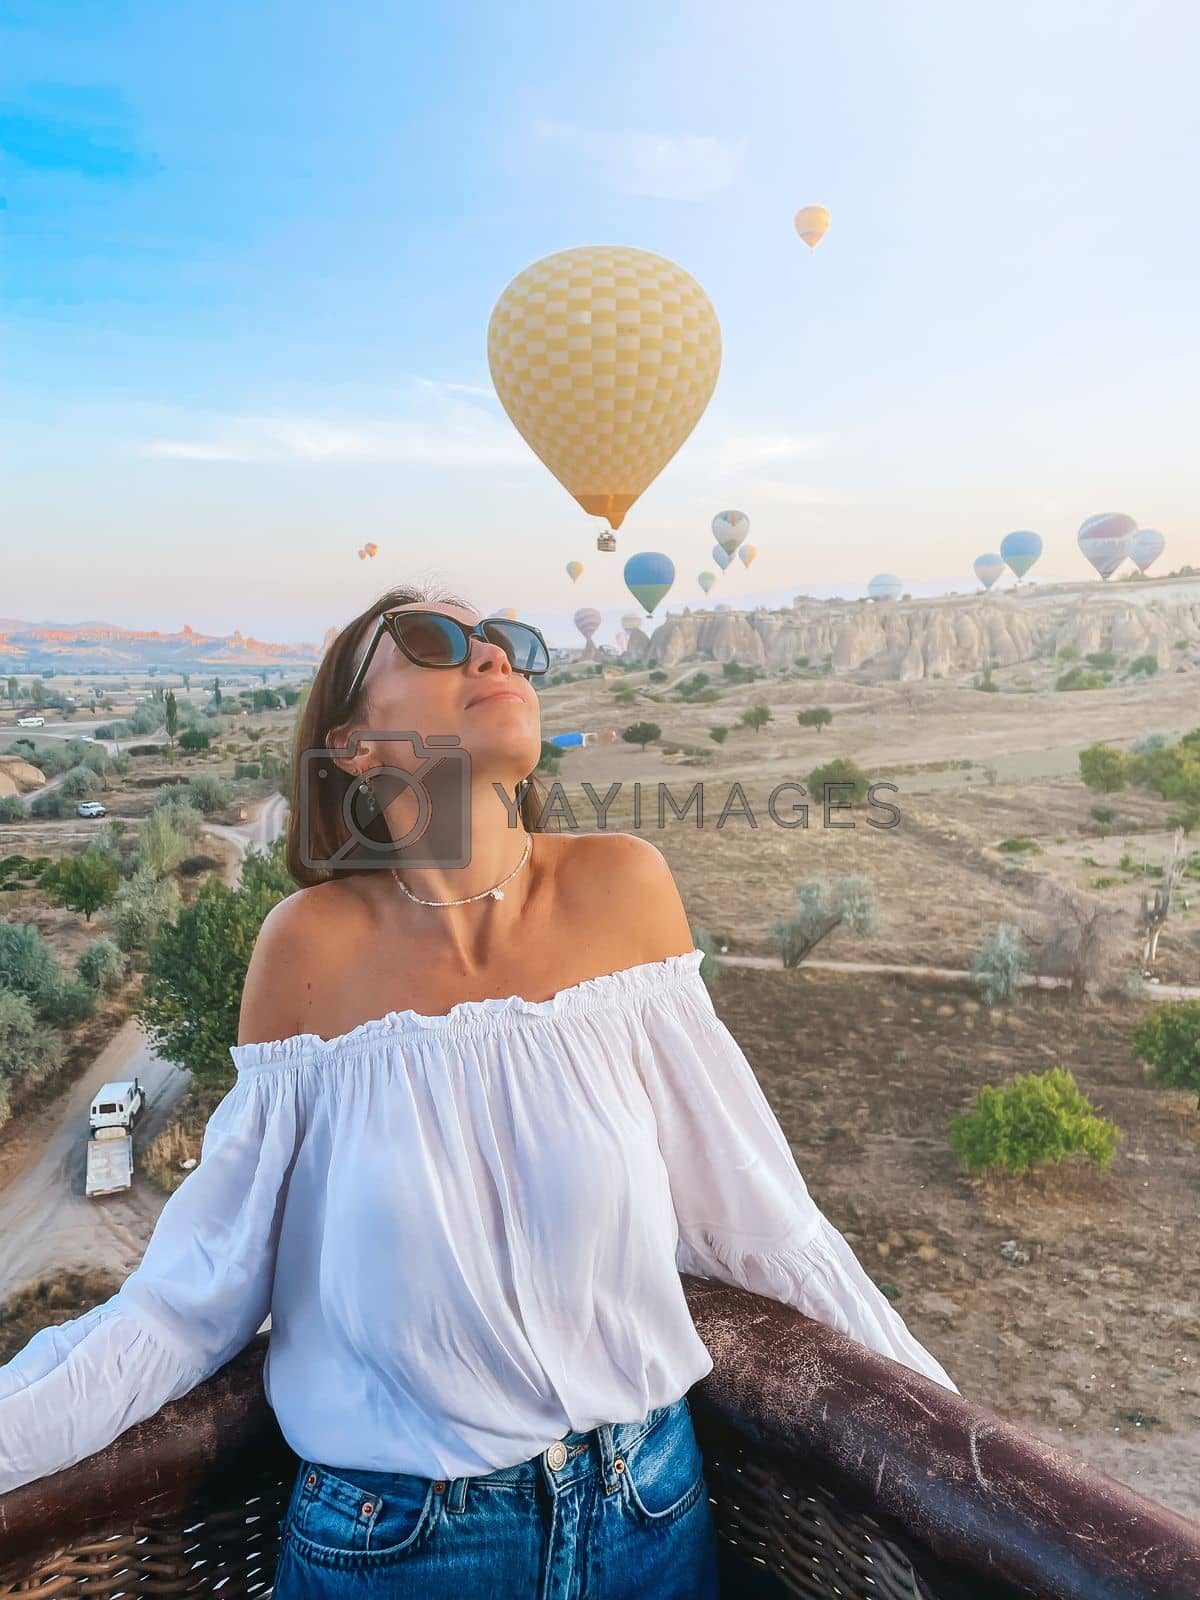 Royalty free image of Happy woman during sunrise watching hot air balloons from a basket in the sky in Cappadocia, Turkey by travnikovstudio